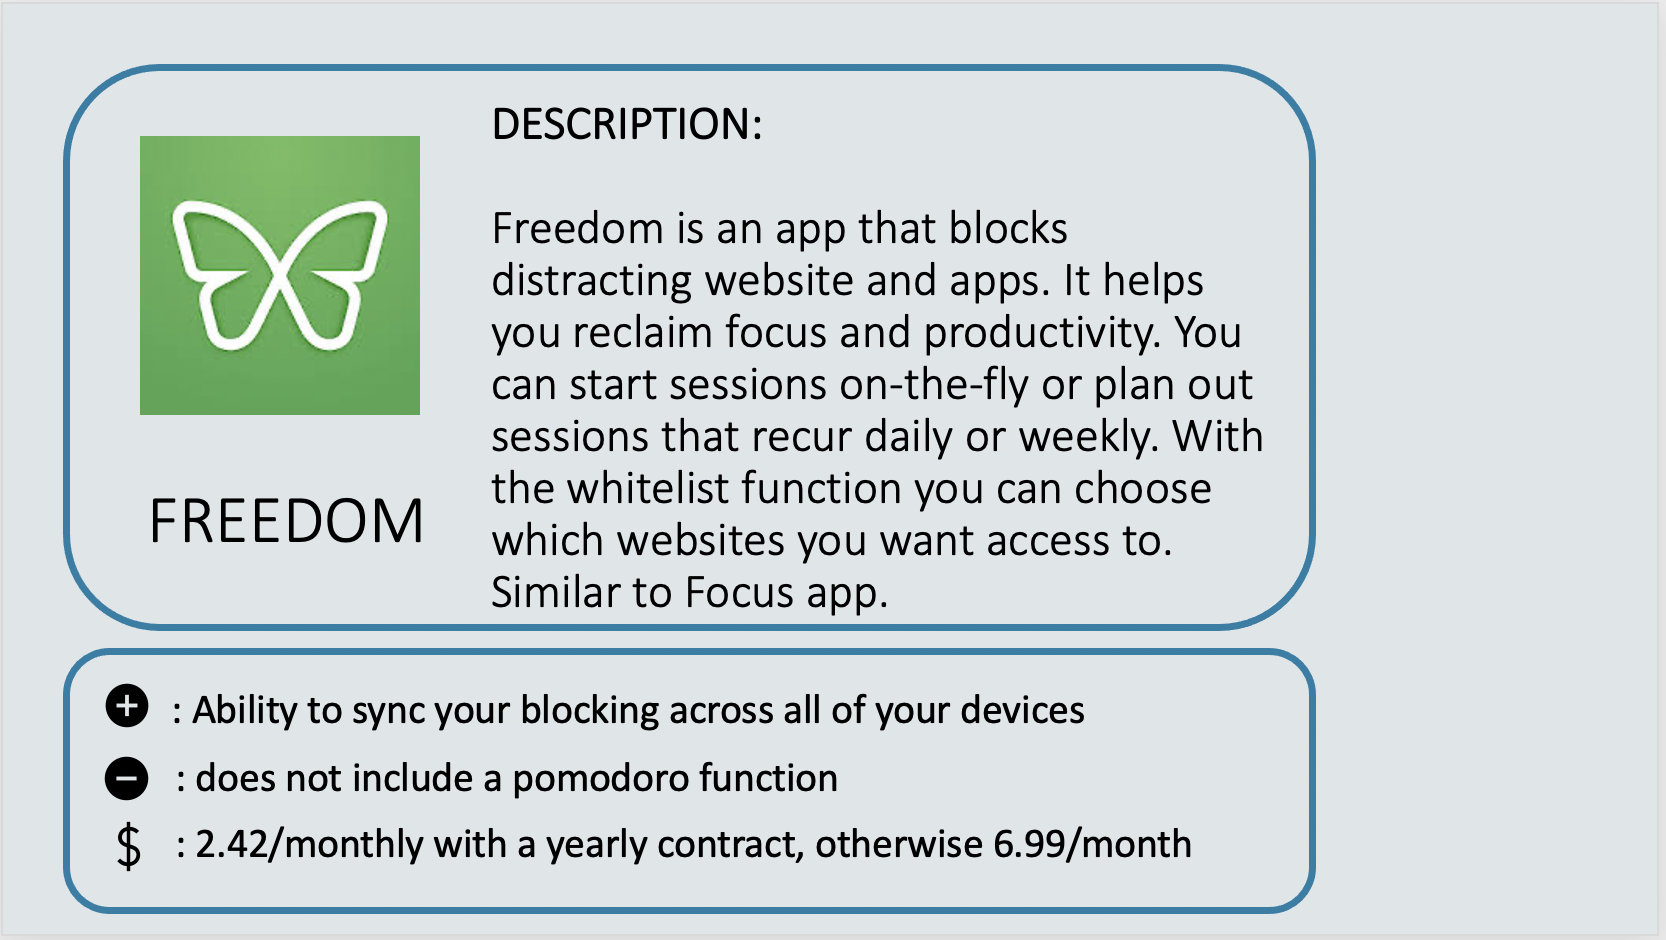 FREEDOM - Freedom is an app that blocks distracting website and apps. It helps you reclaim focus and produc¬tivity. You can start sessions on-the-fly or plan out sess¬ions that recur daily or weekly. With the whitelist function you can choose which websites you want access to. Similar to Focus app. Positive: Ability to sync your blocking across all of your devices. Negative: Does not include a Pomodoro function. Cost: $2.42 per month with a yearly contract, otherwise $6.99 per month.